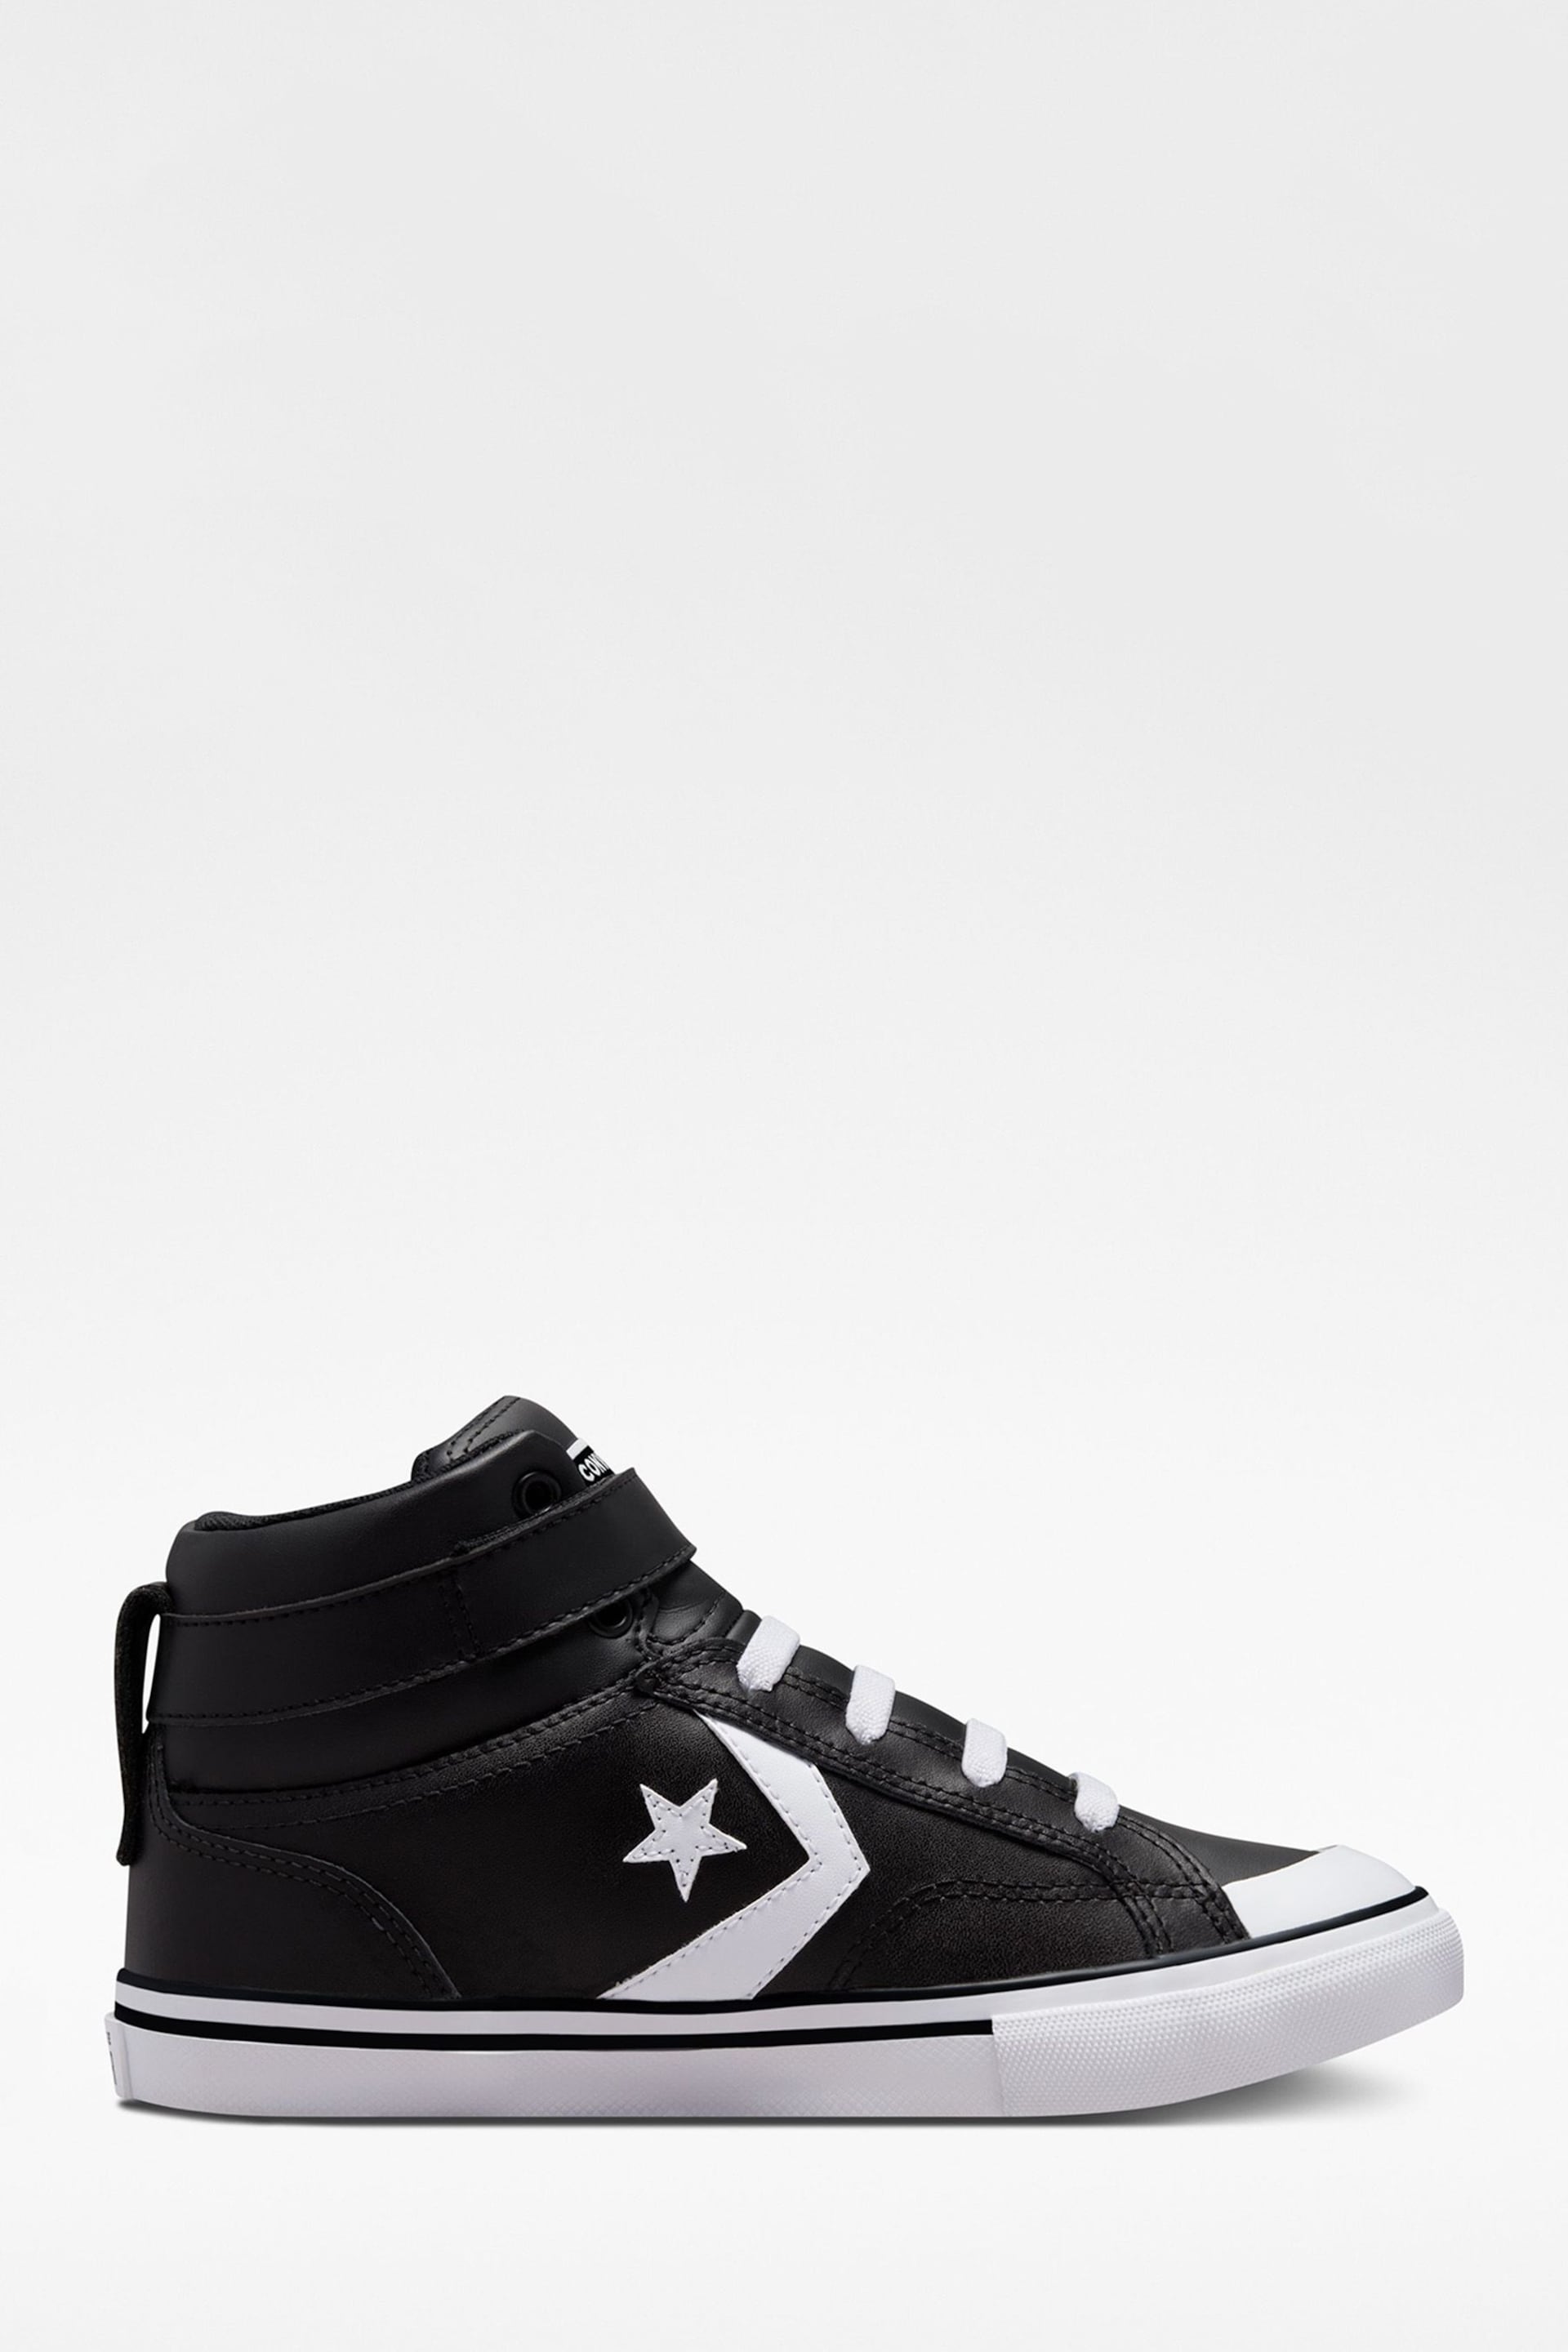 Converse Black/White Pro Blaze Youth Trainers - Image 1 of 7